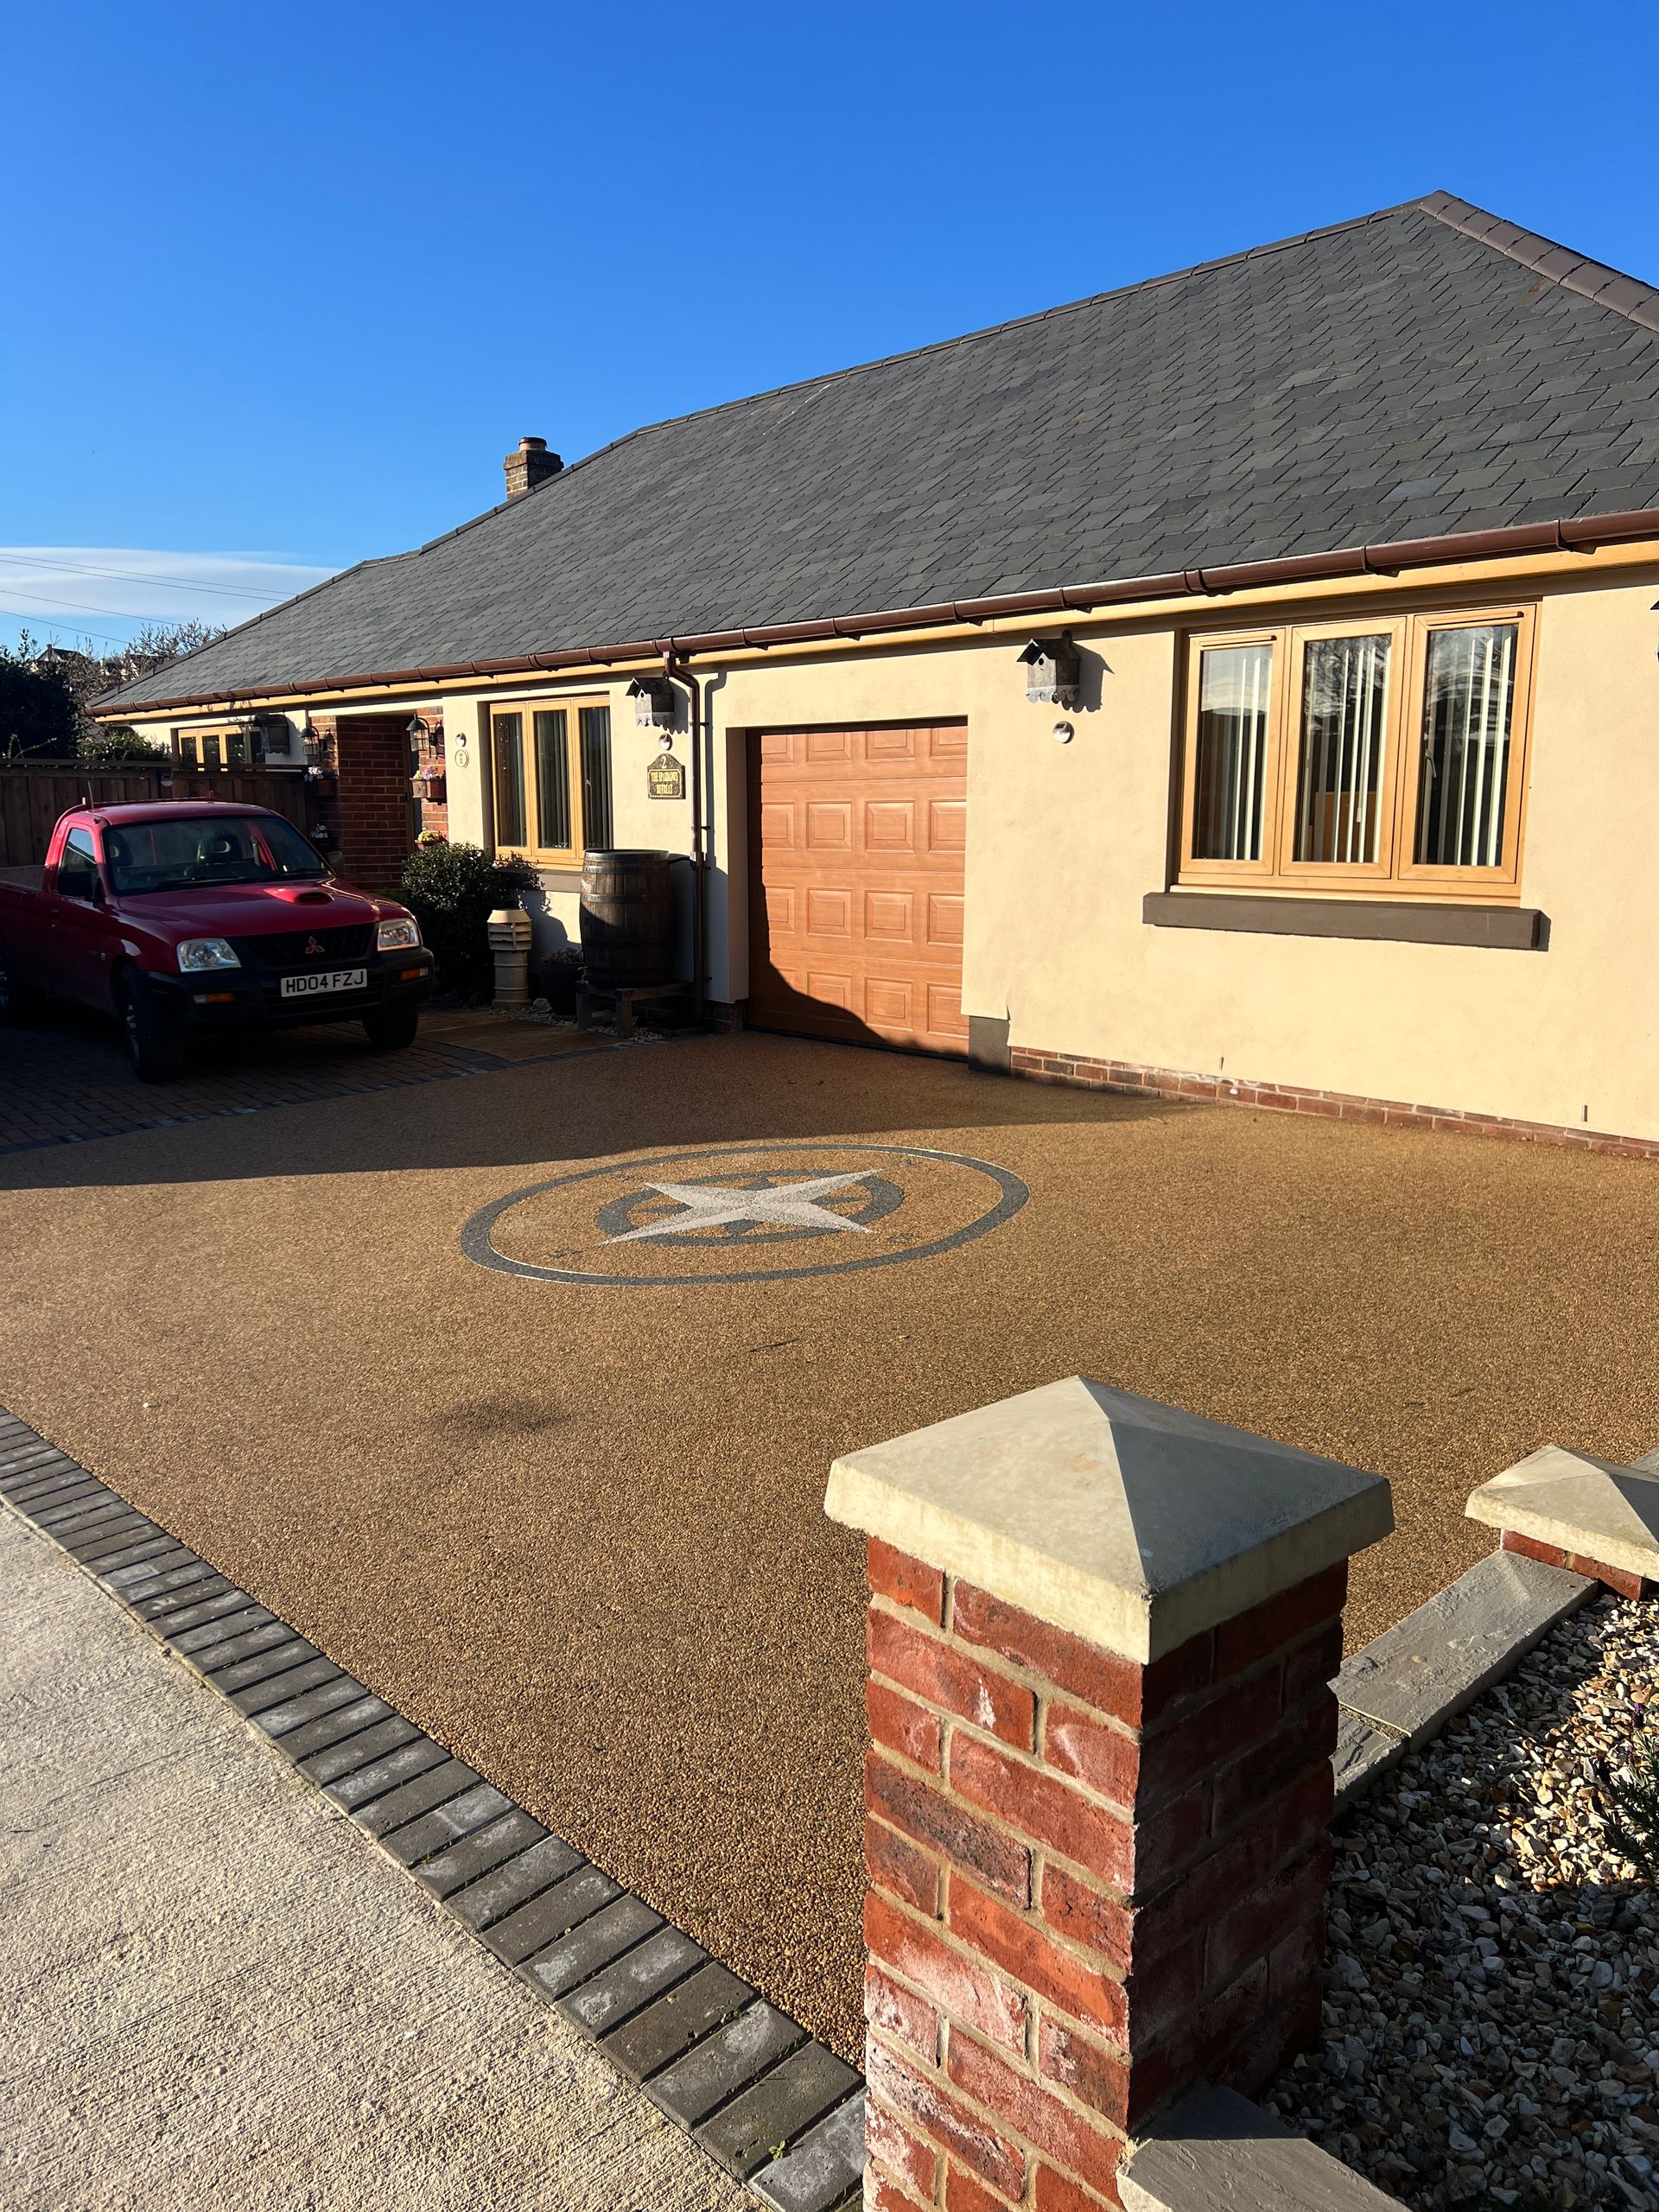 Brown resin driveway with a compass pattern on it, in front of a cream house with a brown garage.